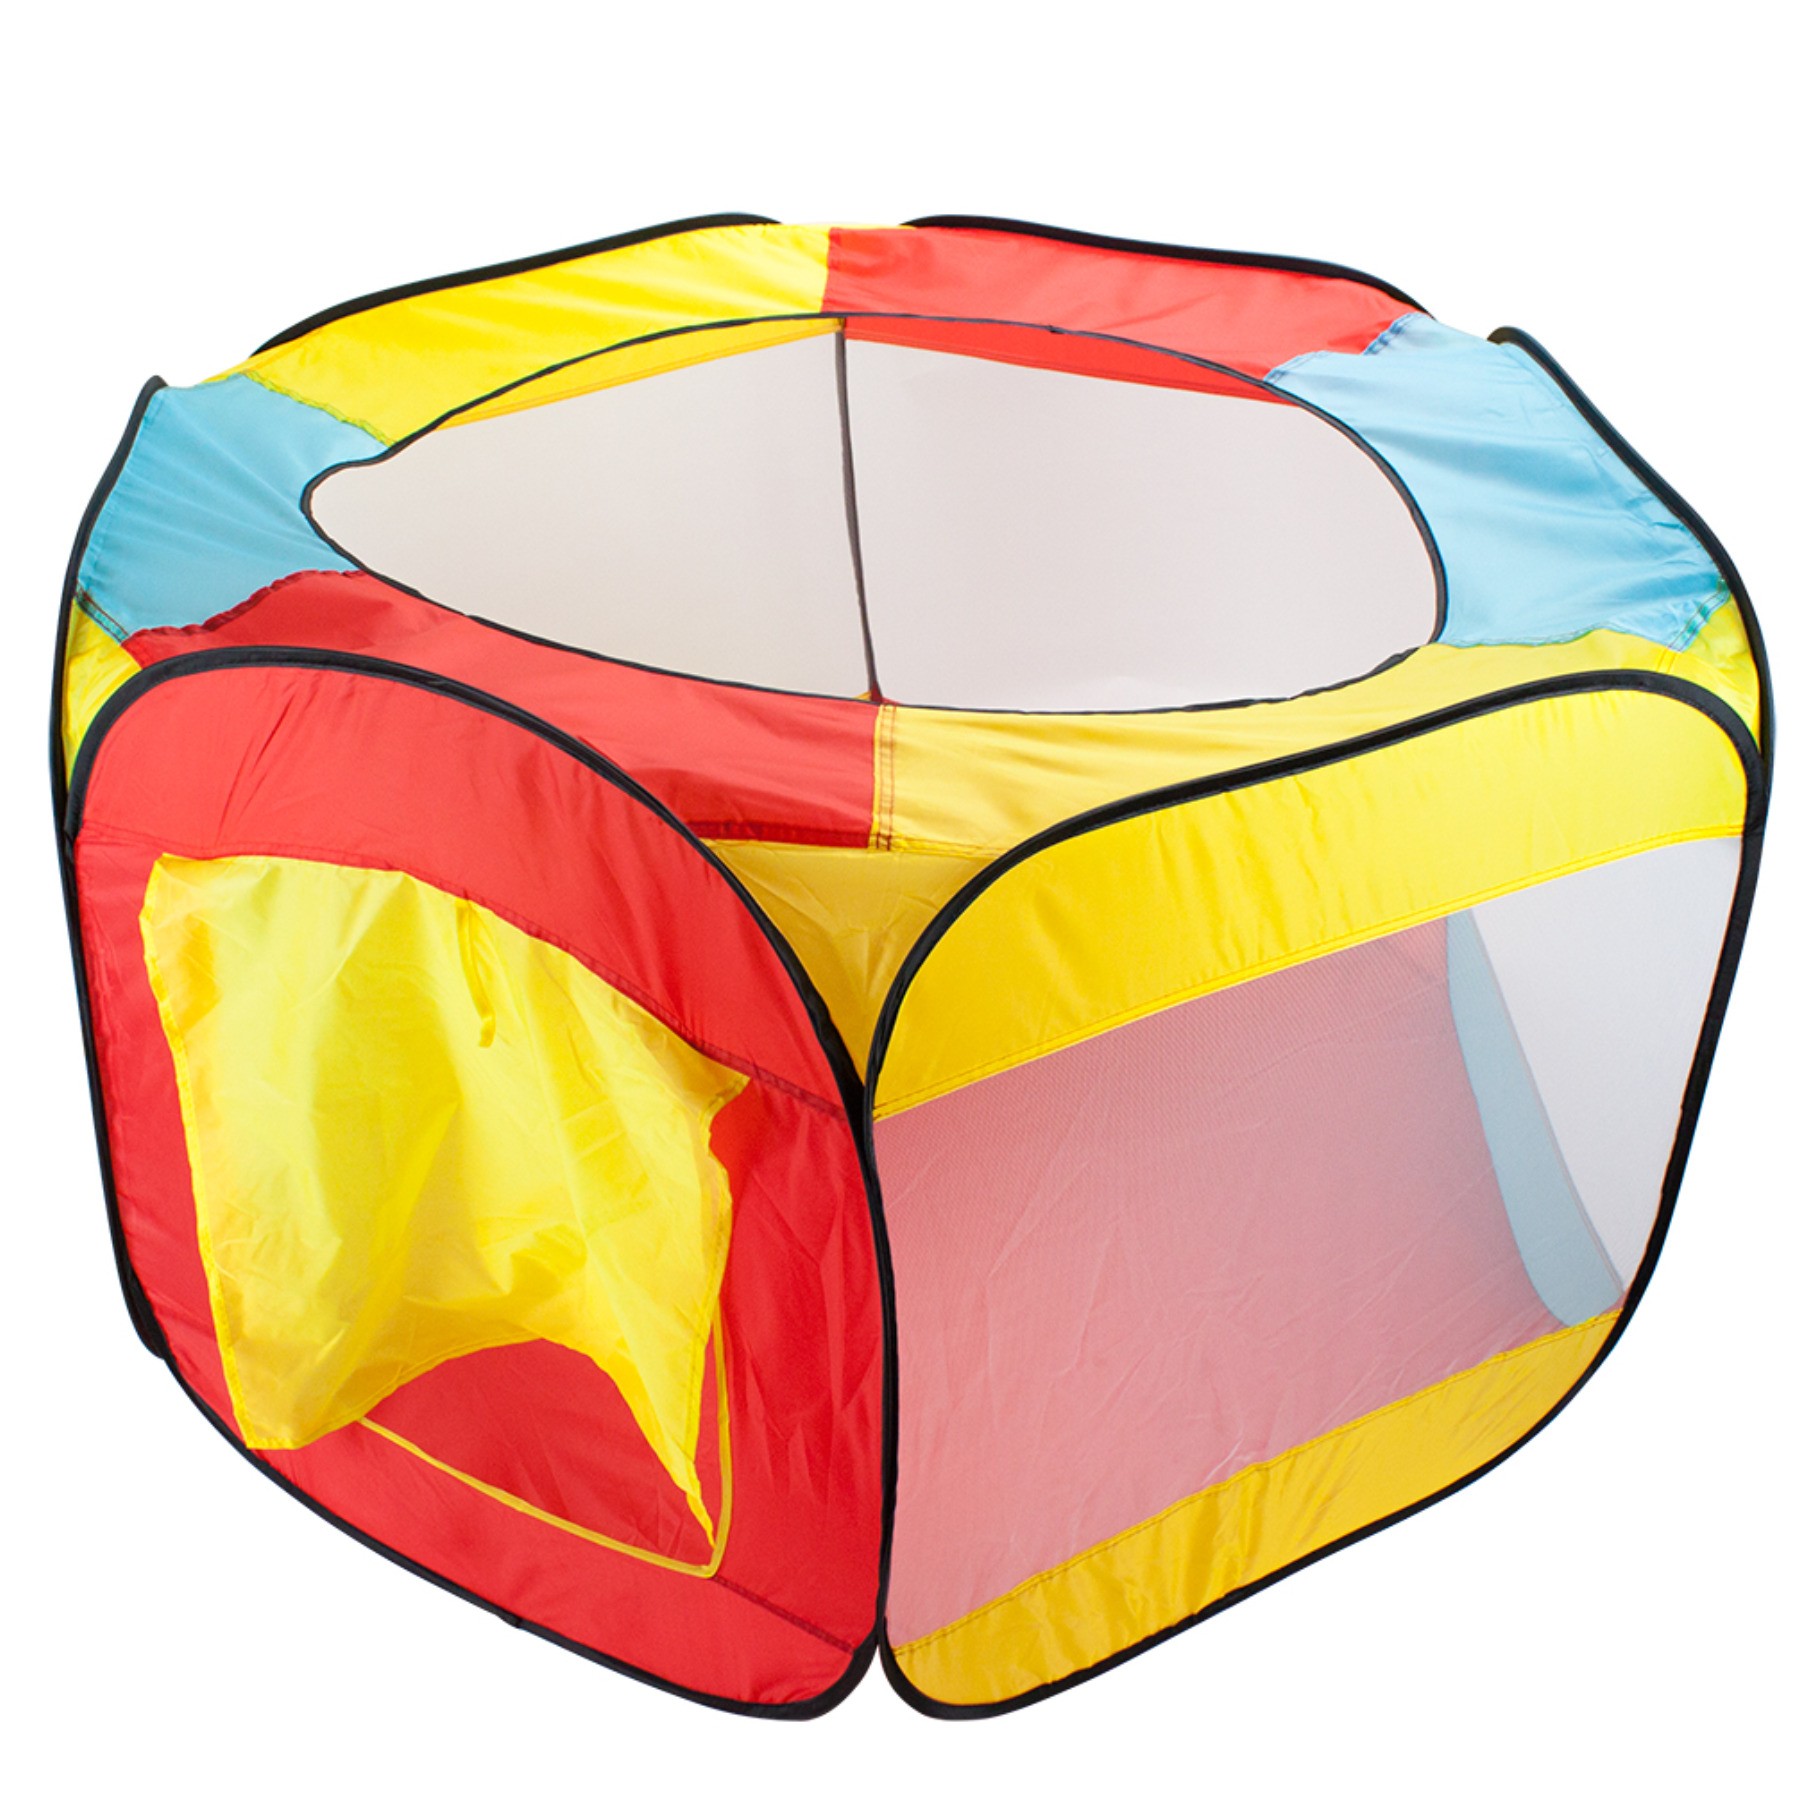 Hexagon Pop Up Ball Pit Tent with Mesh Netting and Case